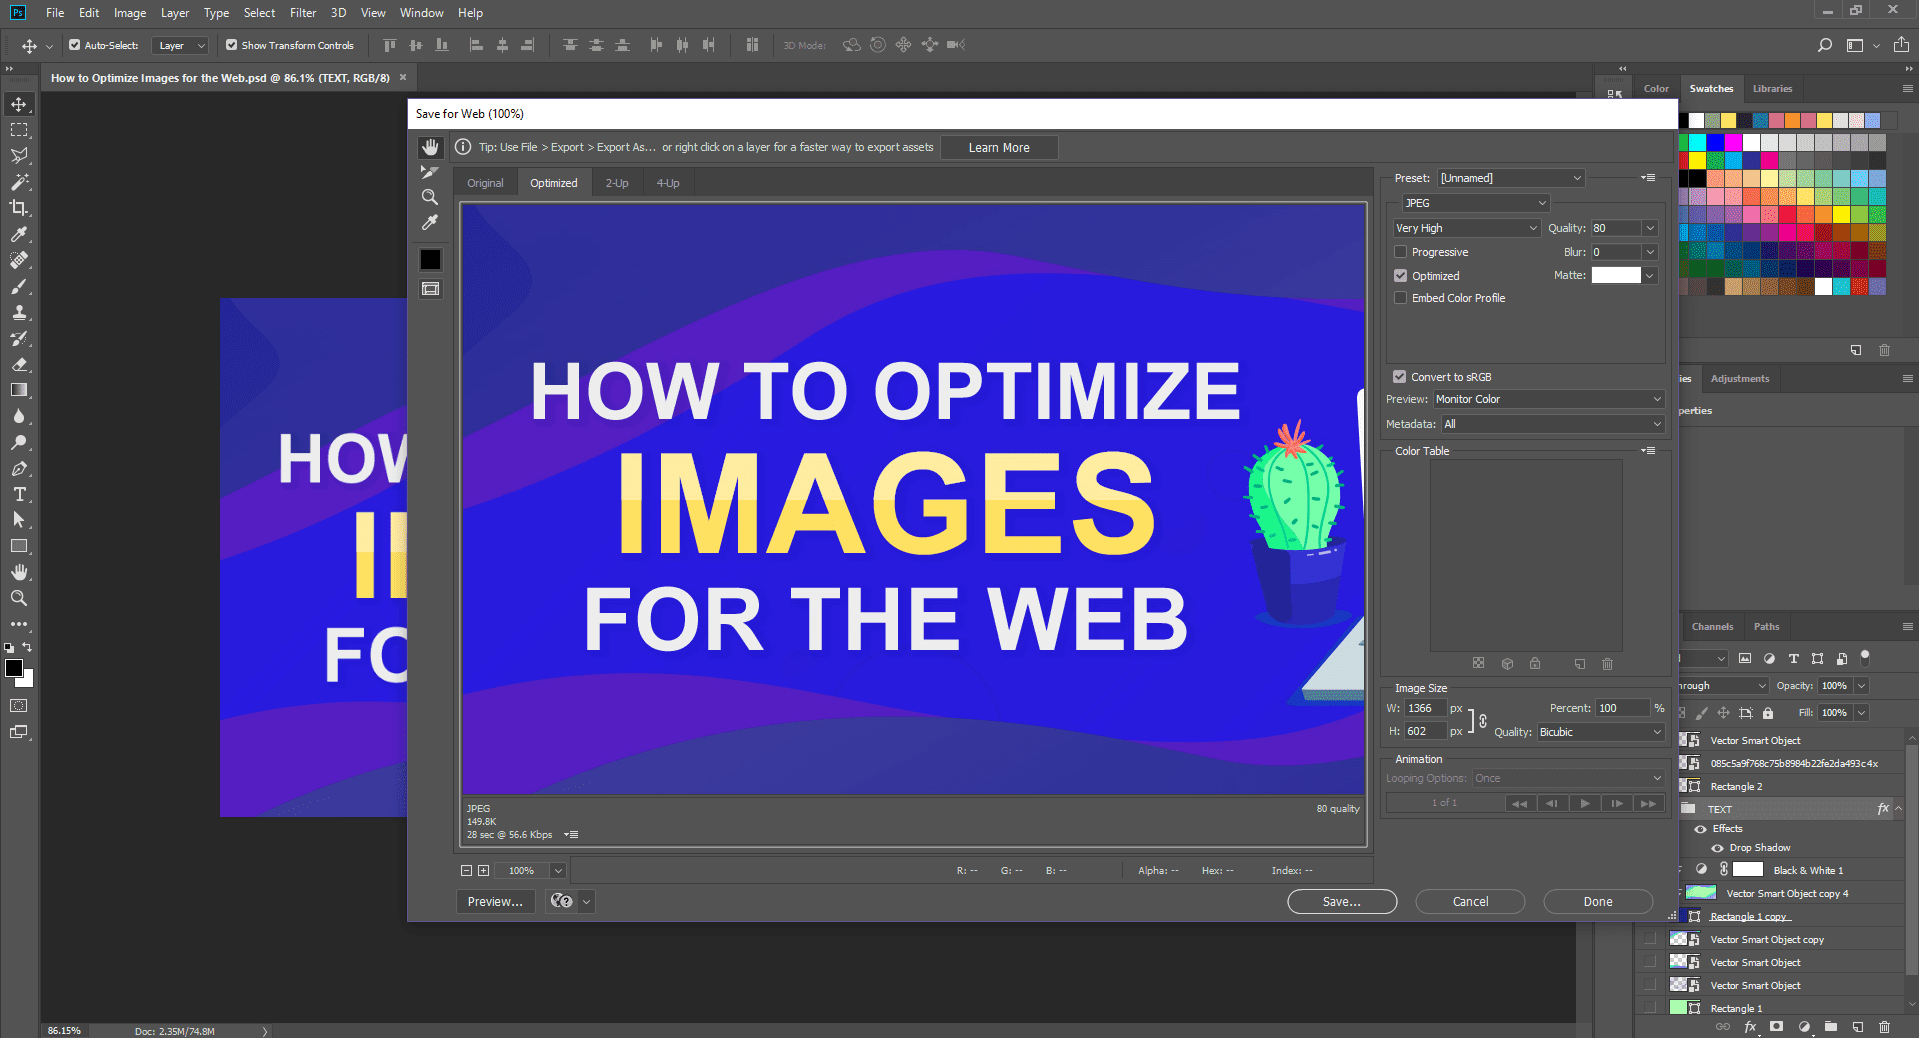 press save for web in adobe photoshop